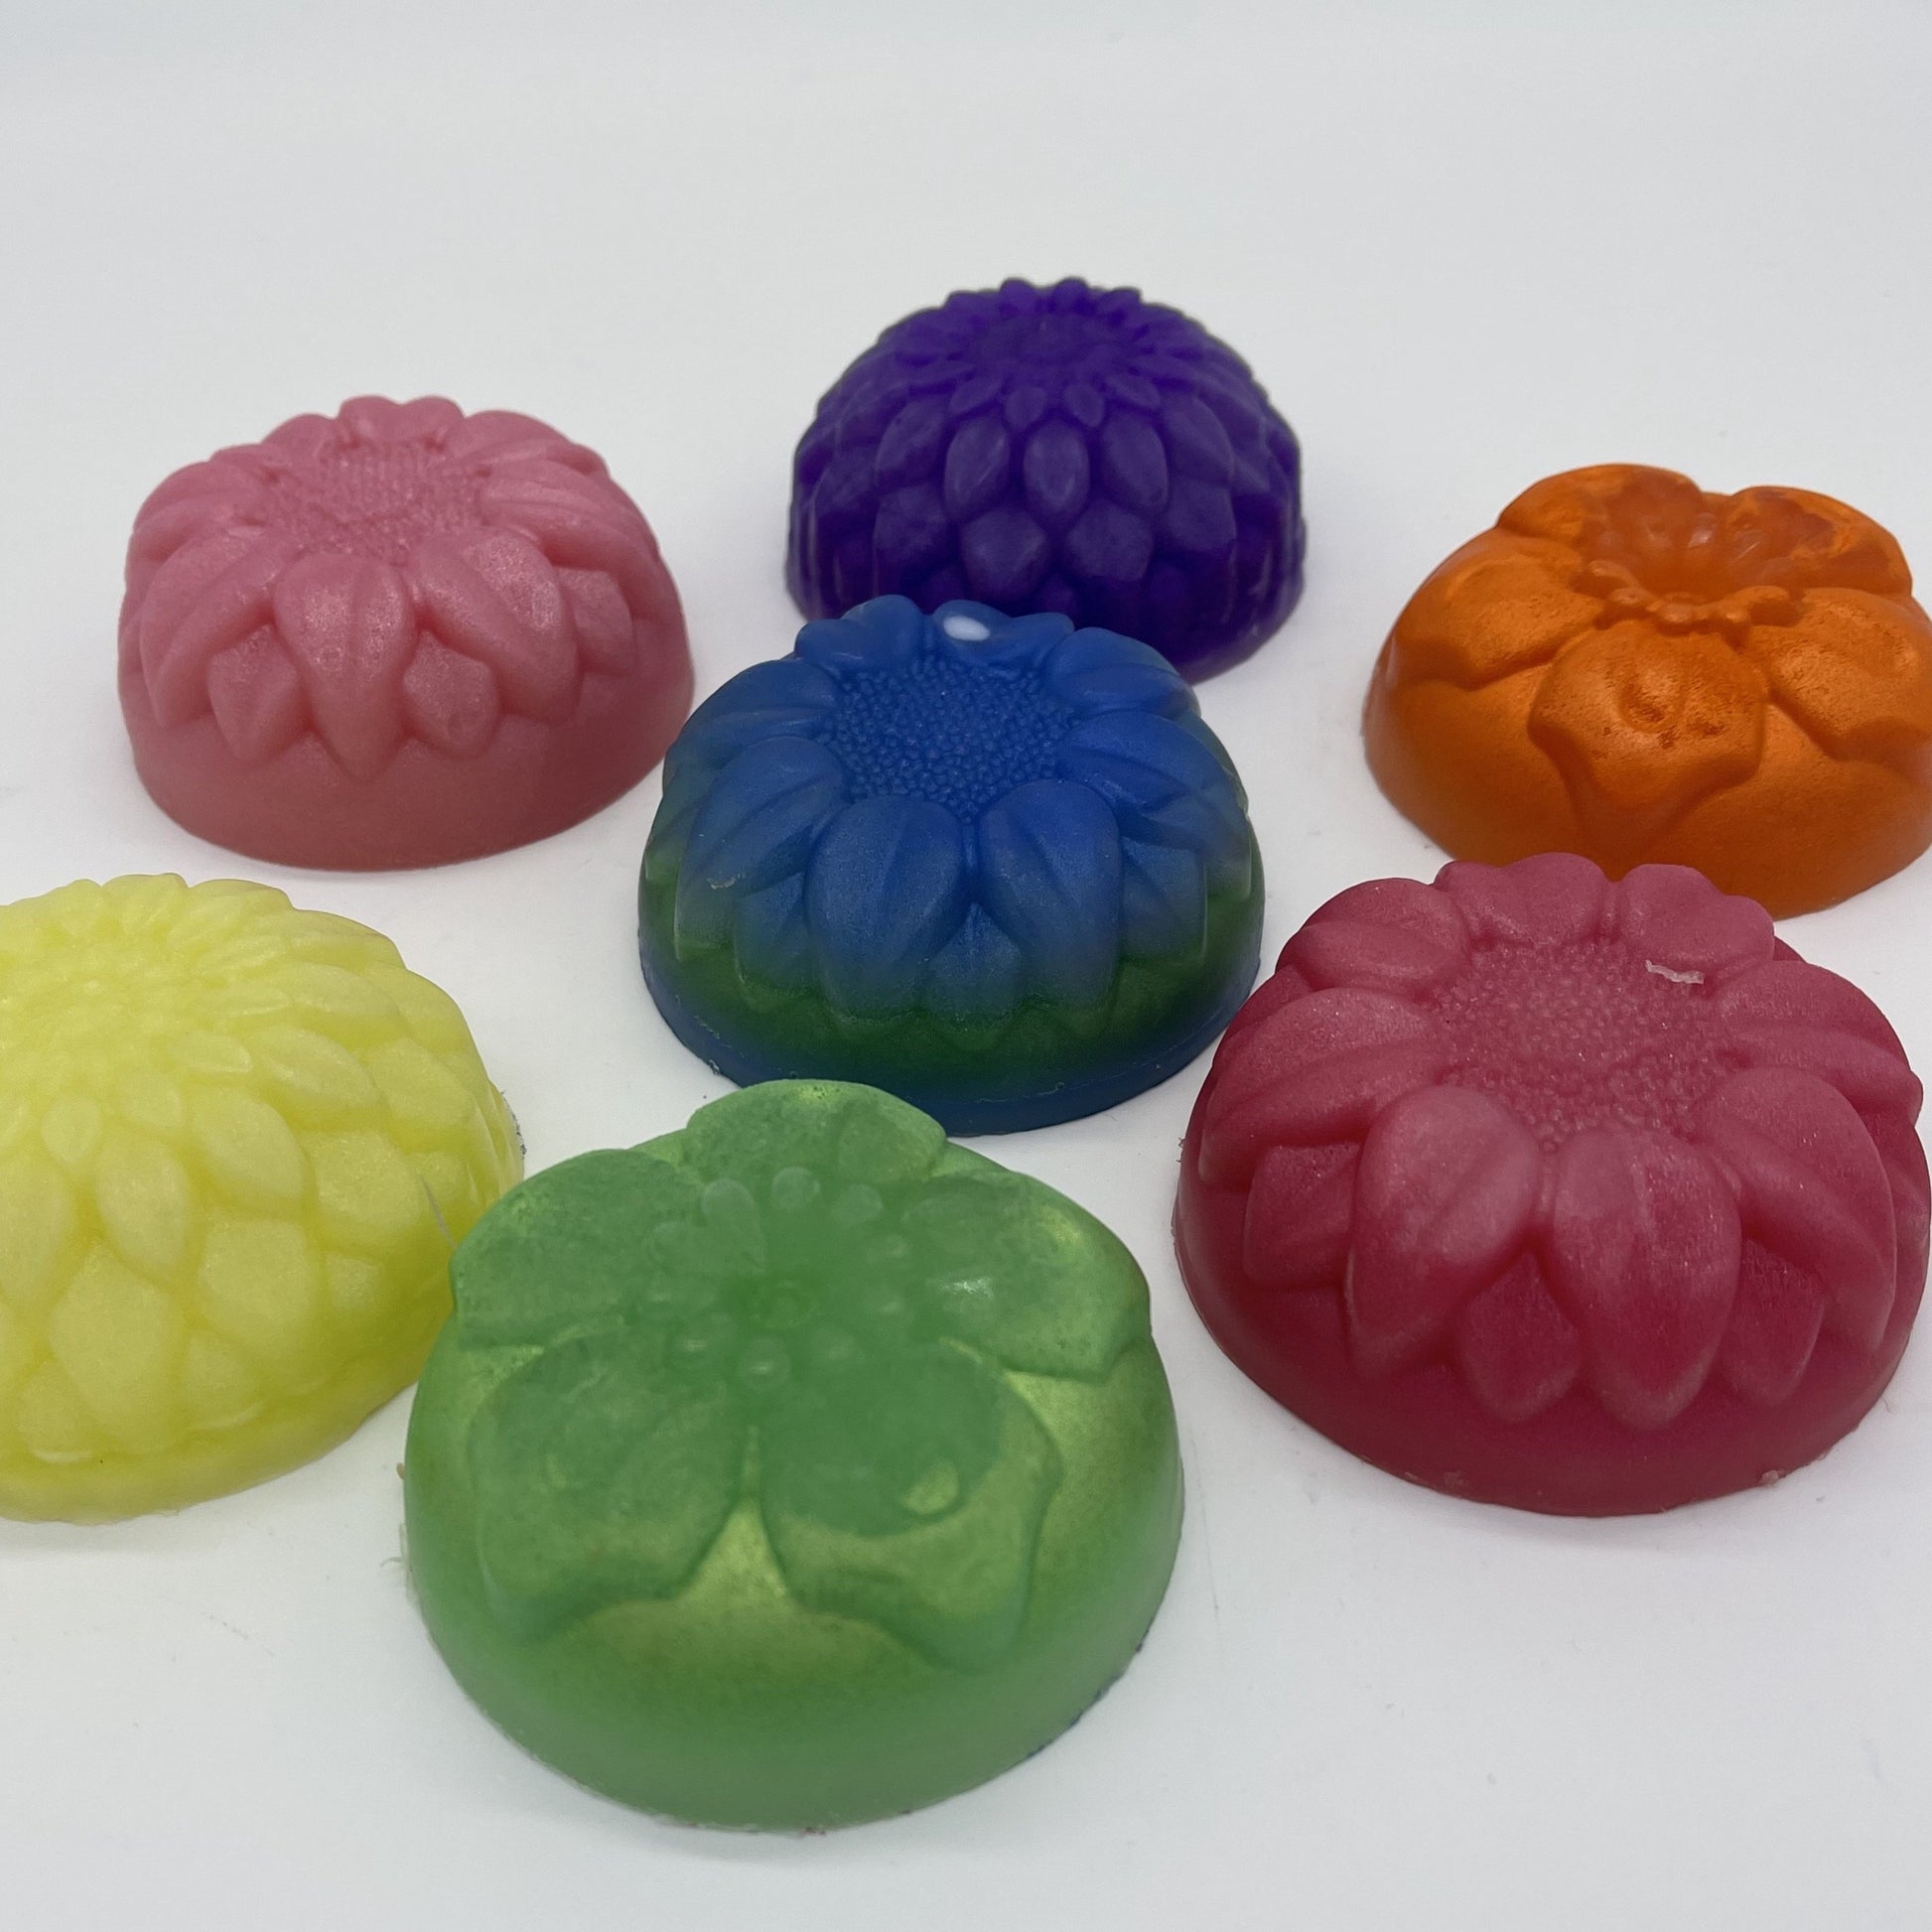 Several solid color round floral soaps including muted yellow, pink, purple, metallic light green, metallic orange and pinks.